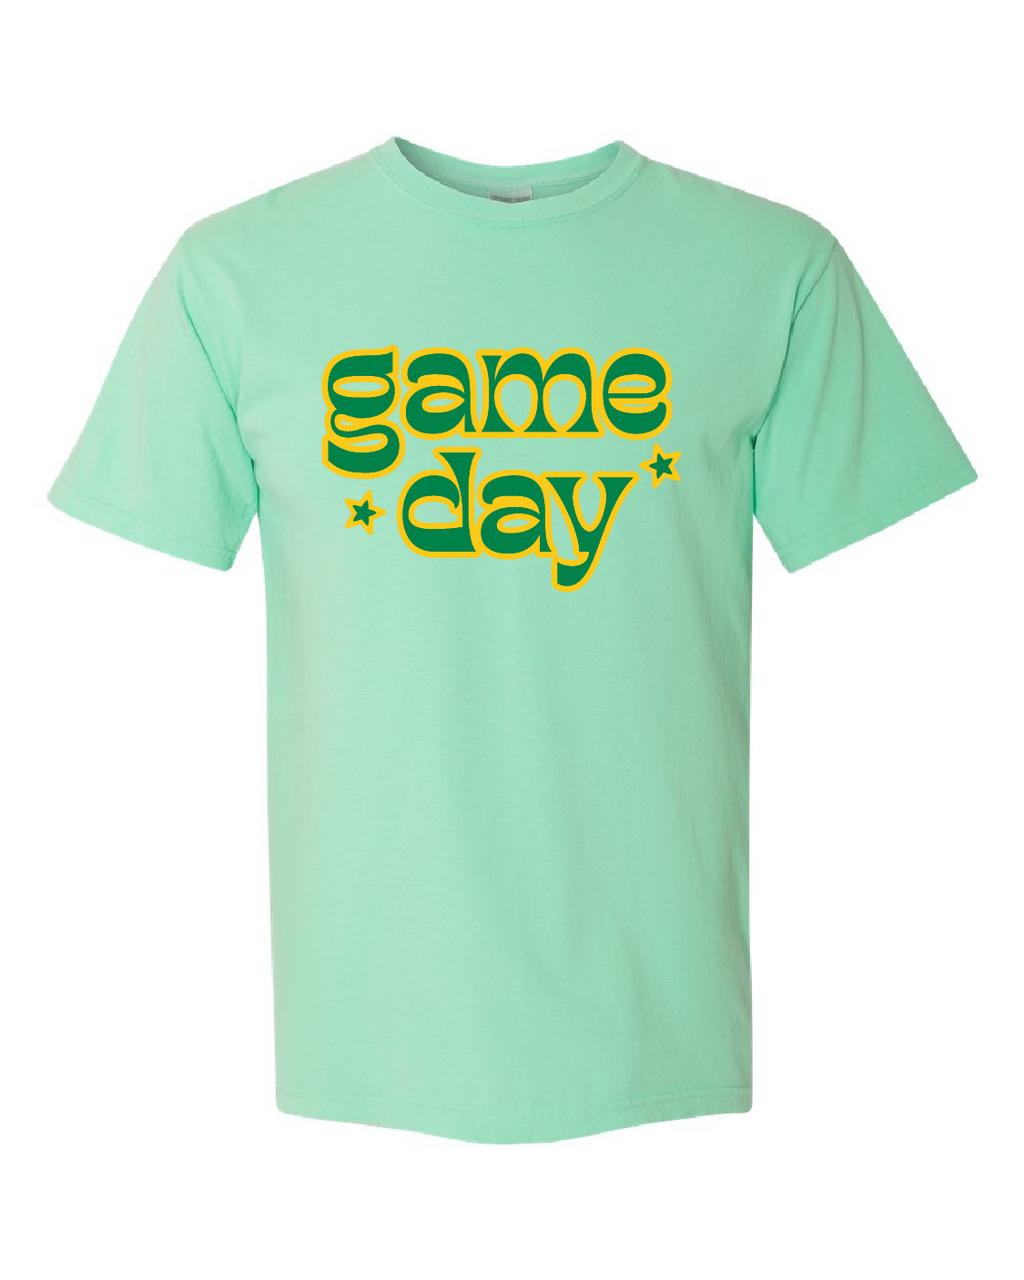 retro print green + gold "game day" tee in mint